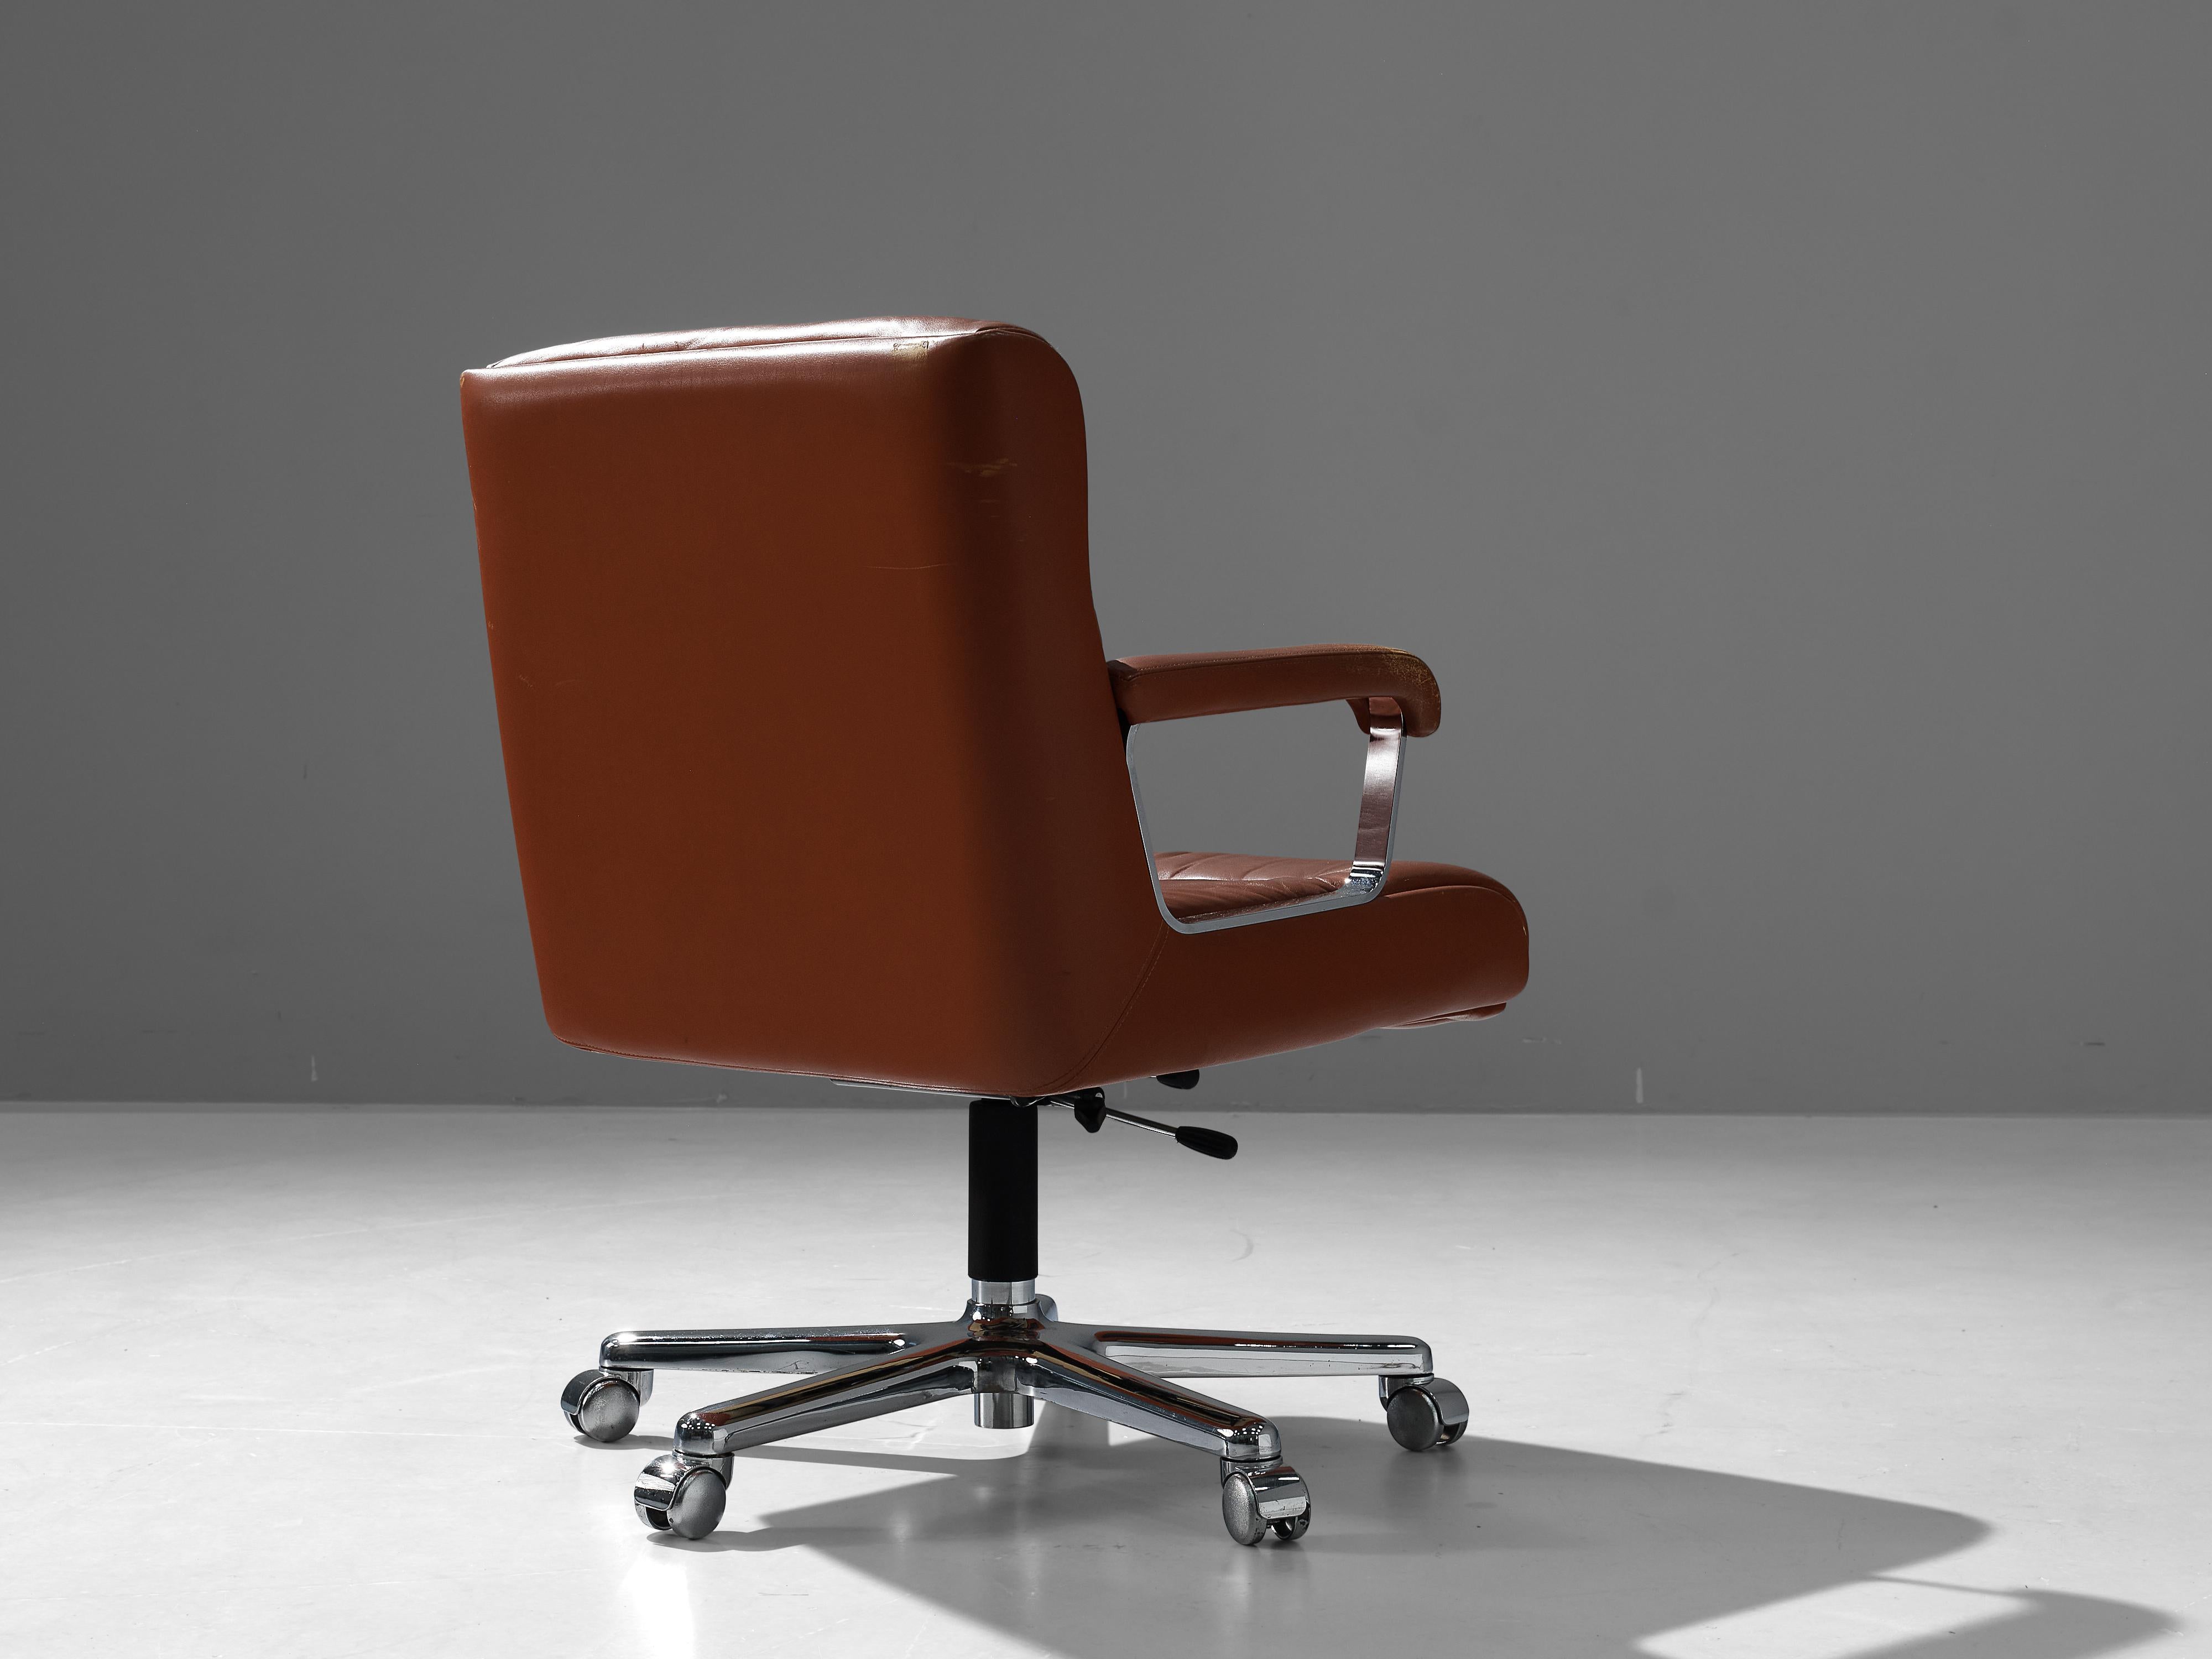 Ring Mekanikk, desk chair, leather, chromed metal, aluminum, Norway, 1960s

Sophisticated desk chair with a wide seat and a high back. The chair is provided with a full 360 degree rotation function. Both the seat and the armrests are upholstered in